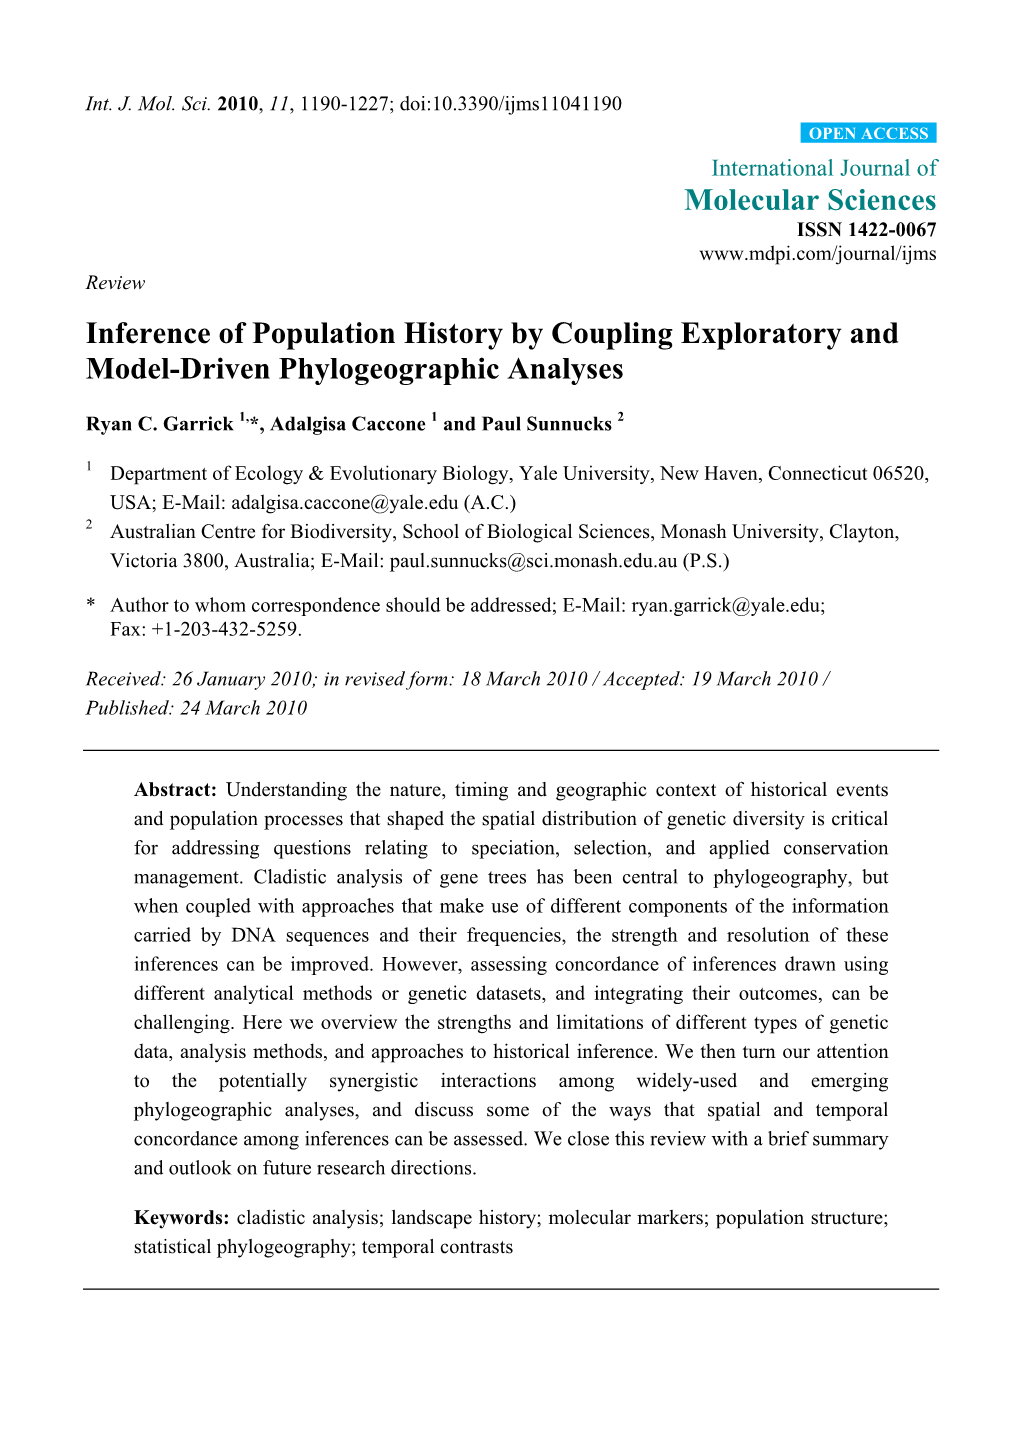 Inference of Population History by Coupling Exploratory and Model-Driven Phylogeographic Analyses